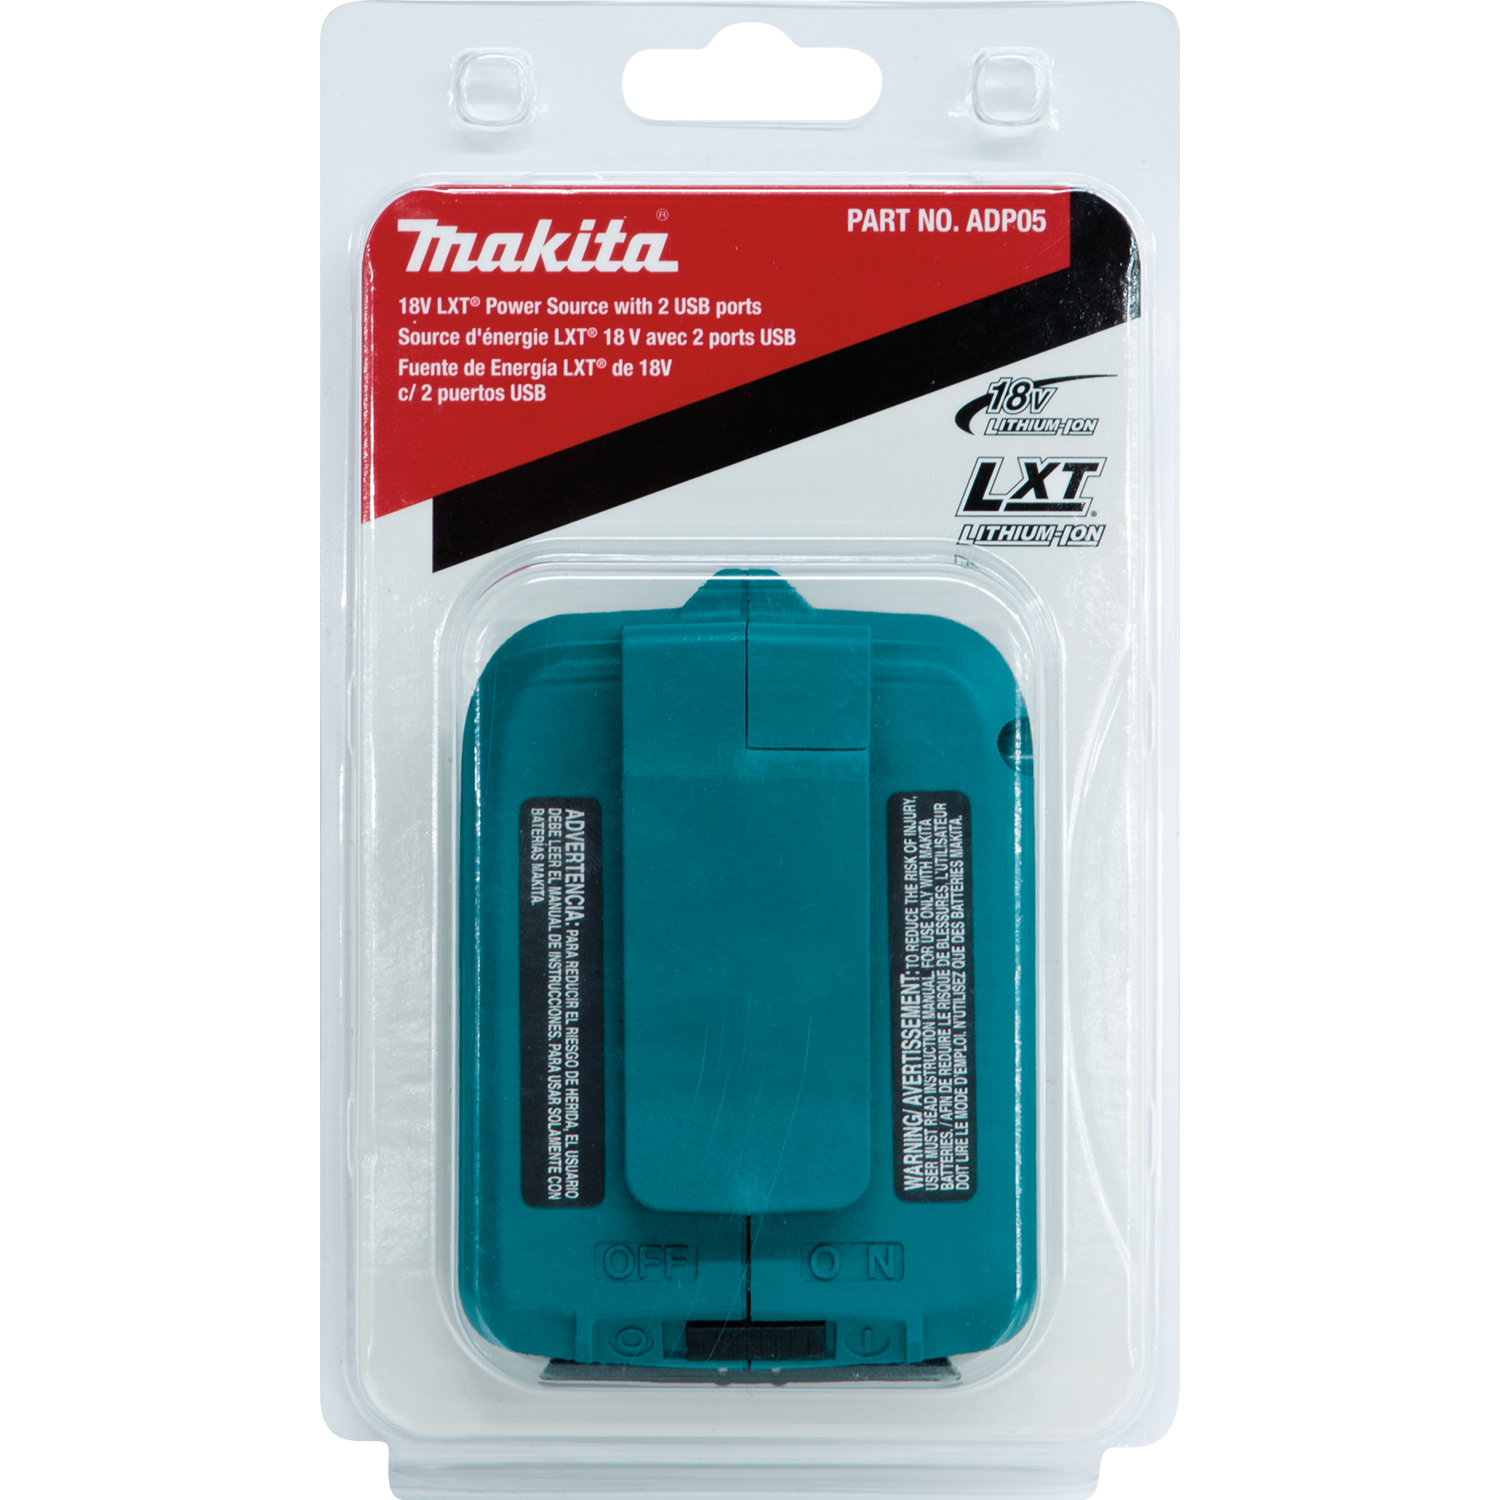 Makita 18v Cordless Adapter For USB Li-Ion ADP05 Solo Power Tool Services